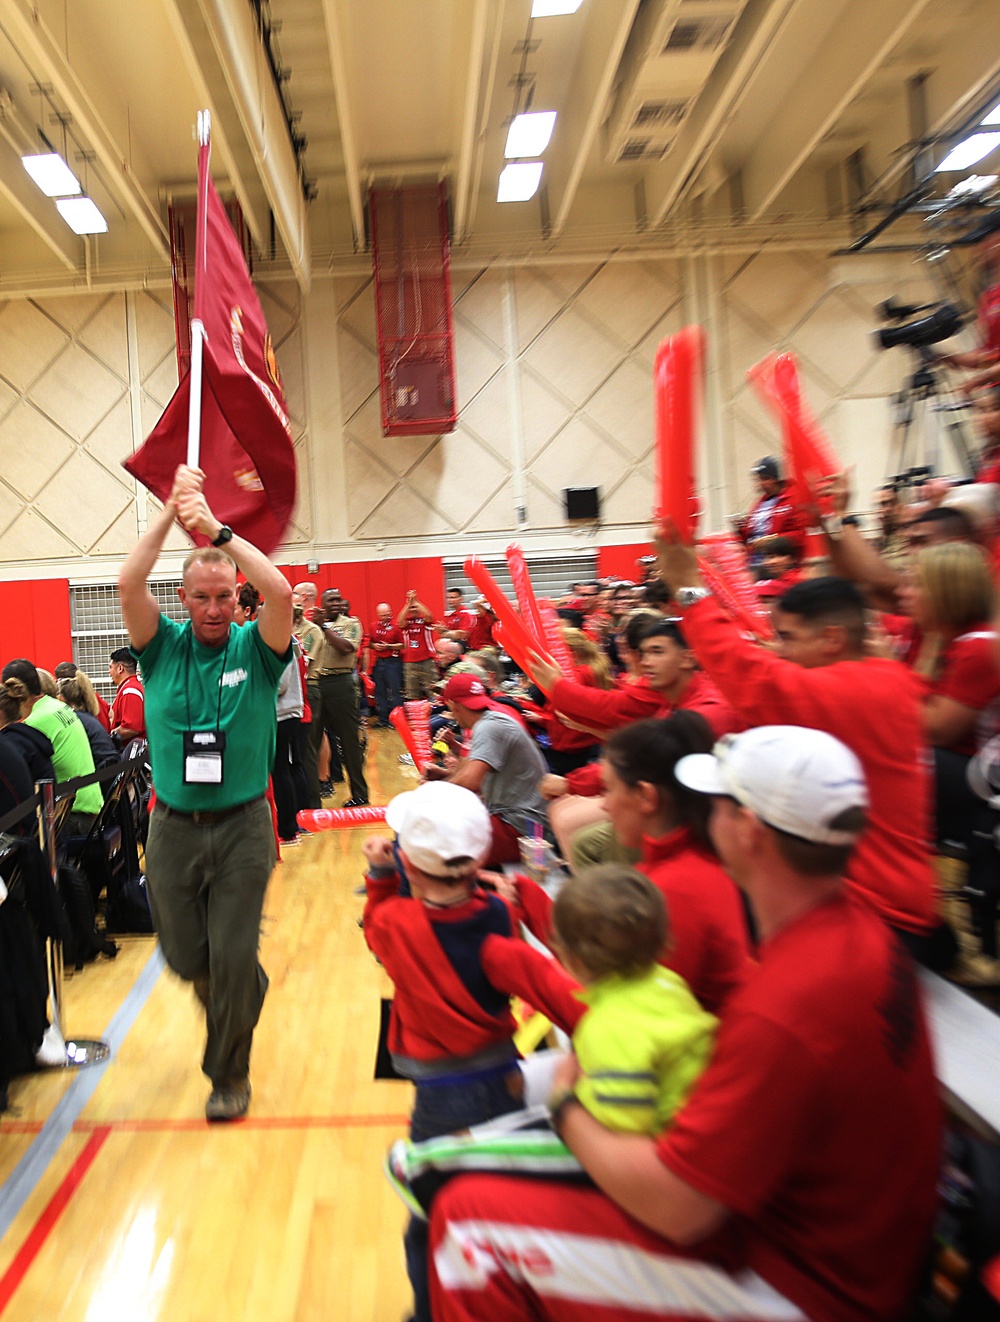 And The Crowd Goals Wild at The 2014 Warrior Games